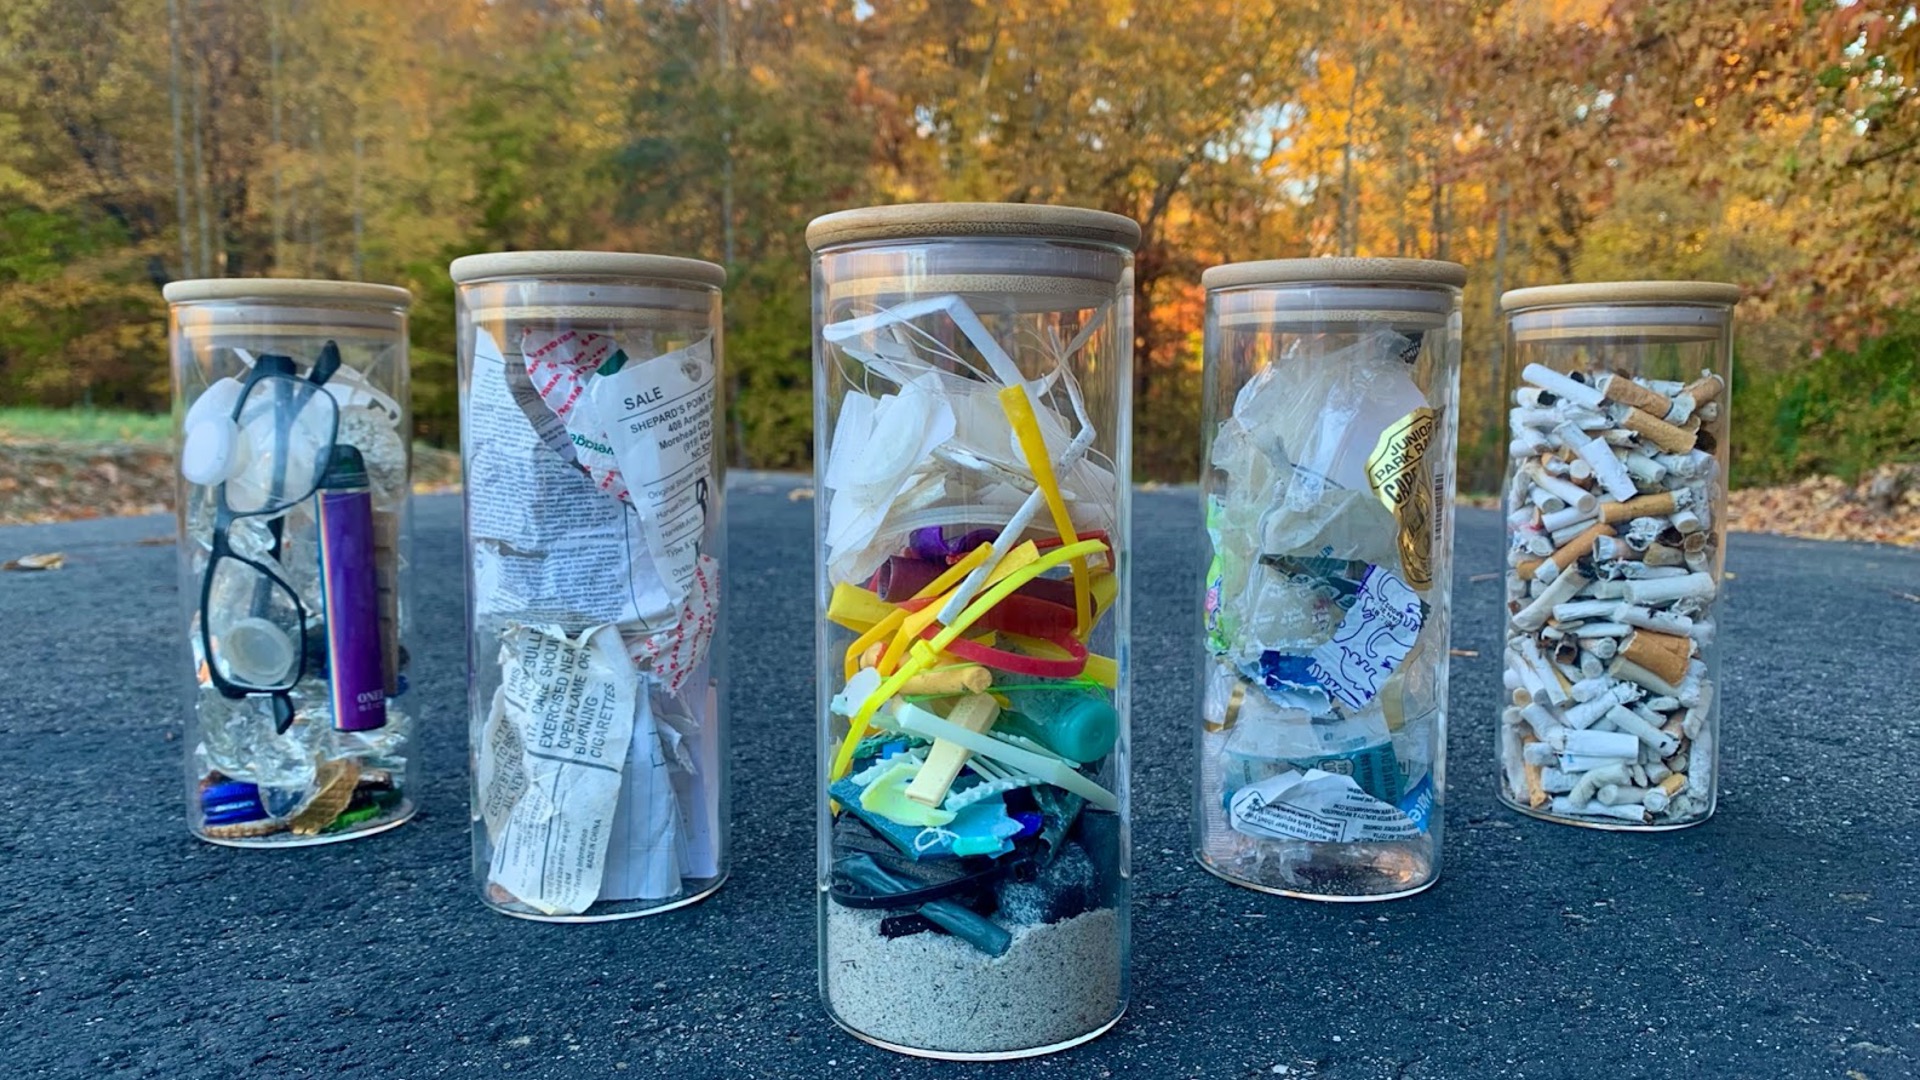 Beach Pollution art piece - five jars, each containing different types of trash